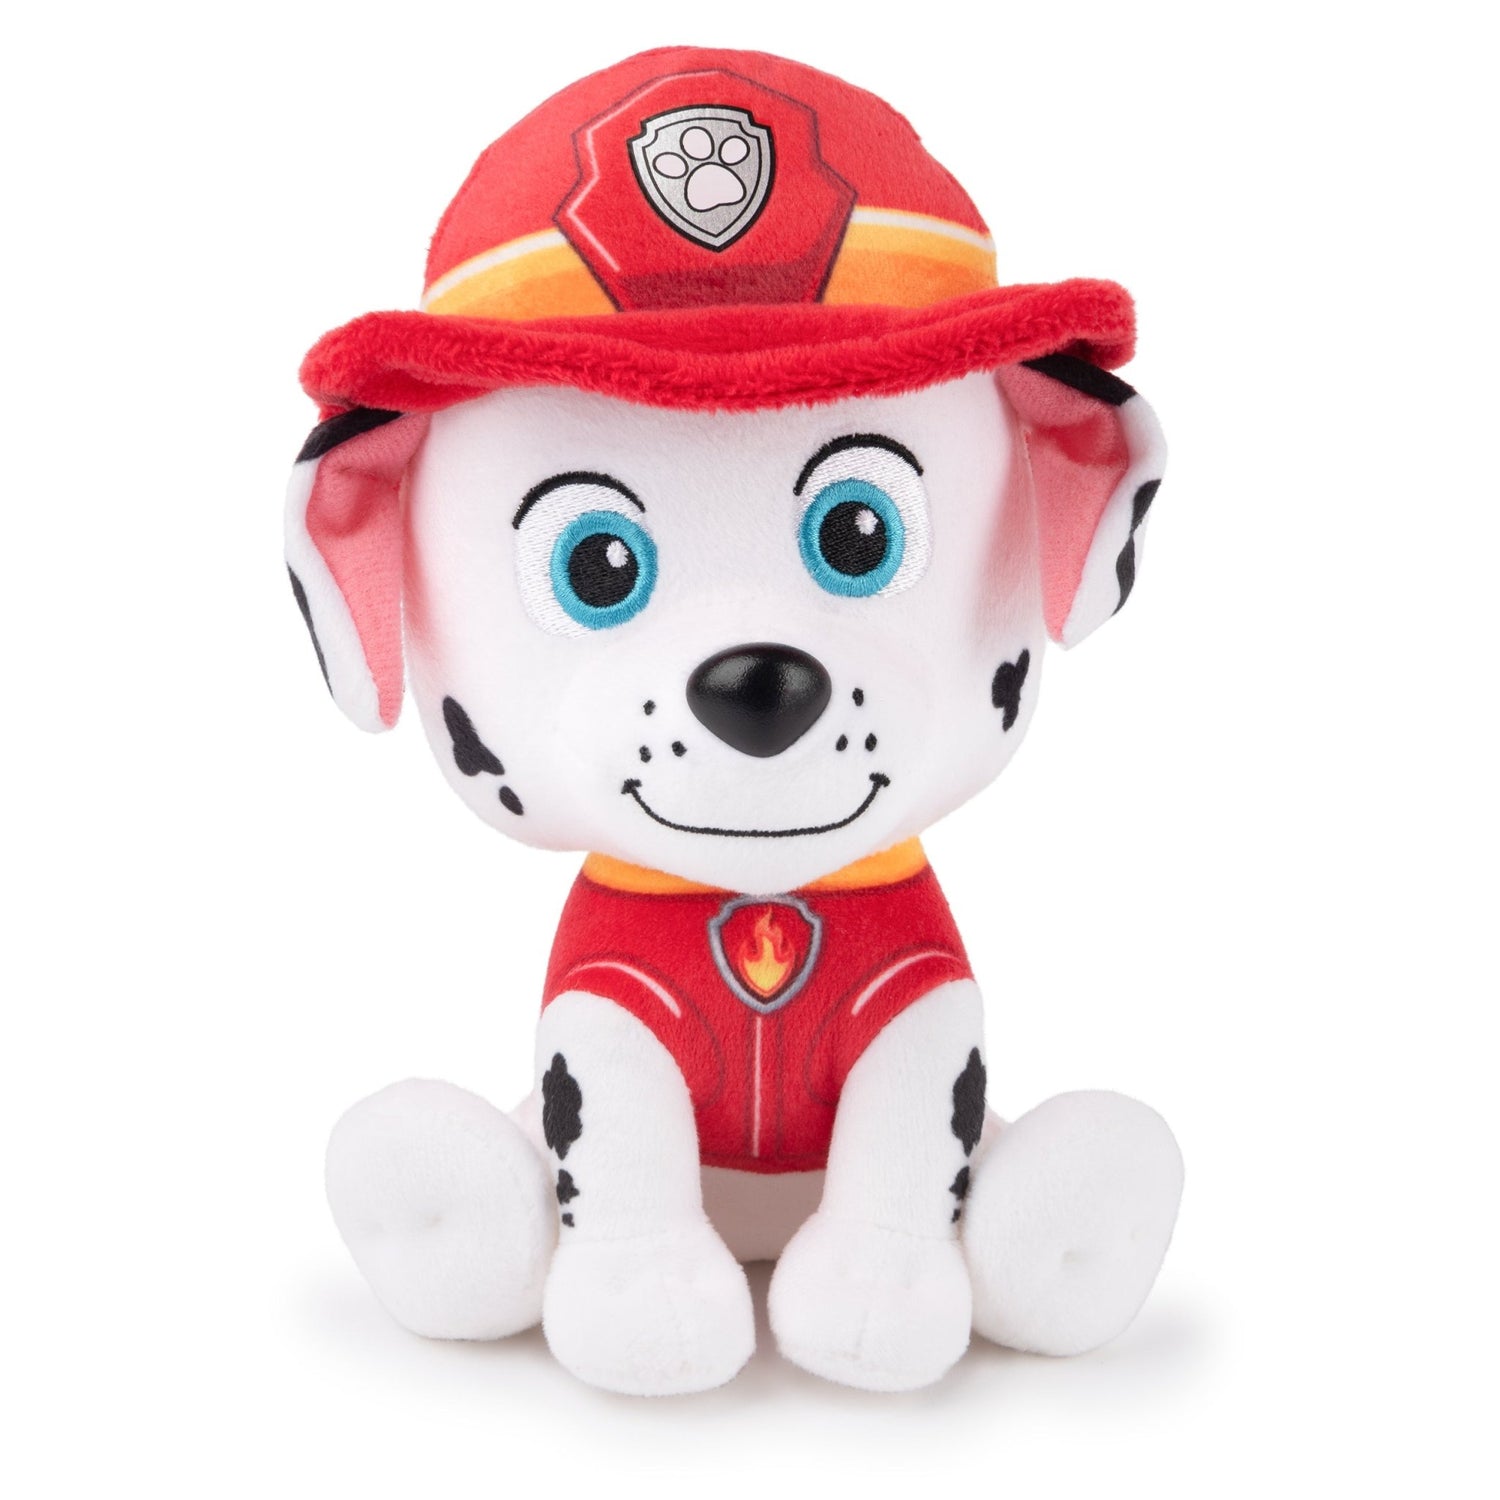 GUND Official PAW Patrol Marshall in Signature Firefighter Uniform Plush Toy, Stuffed Animal for Ages 1 and Up, 6" - Paramount Shop